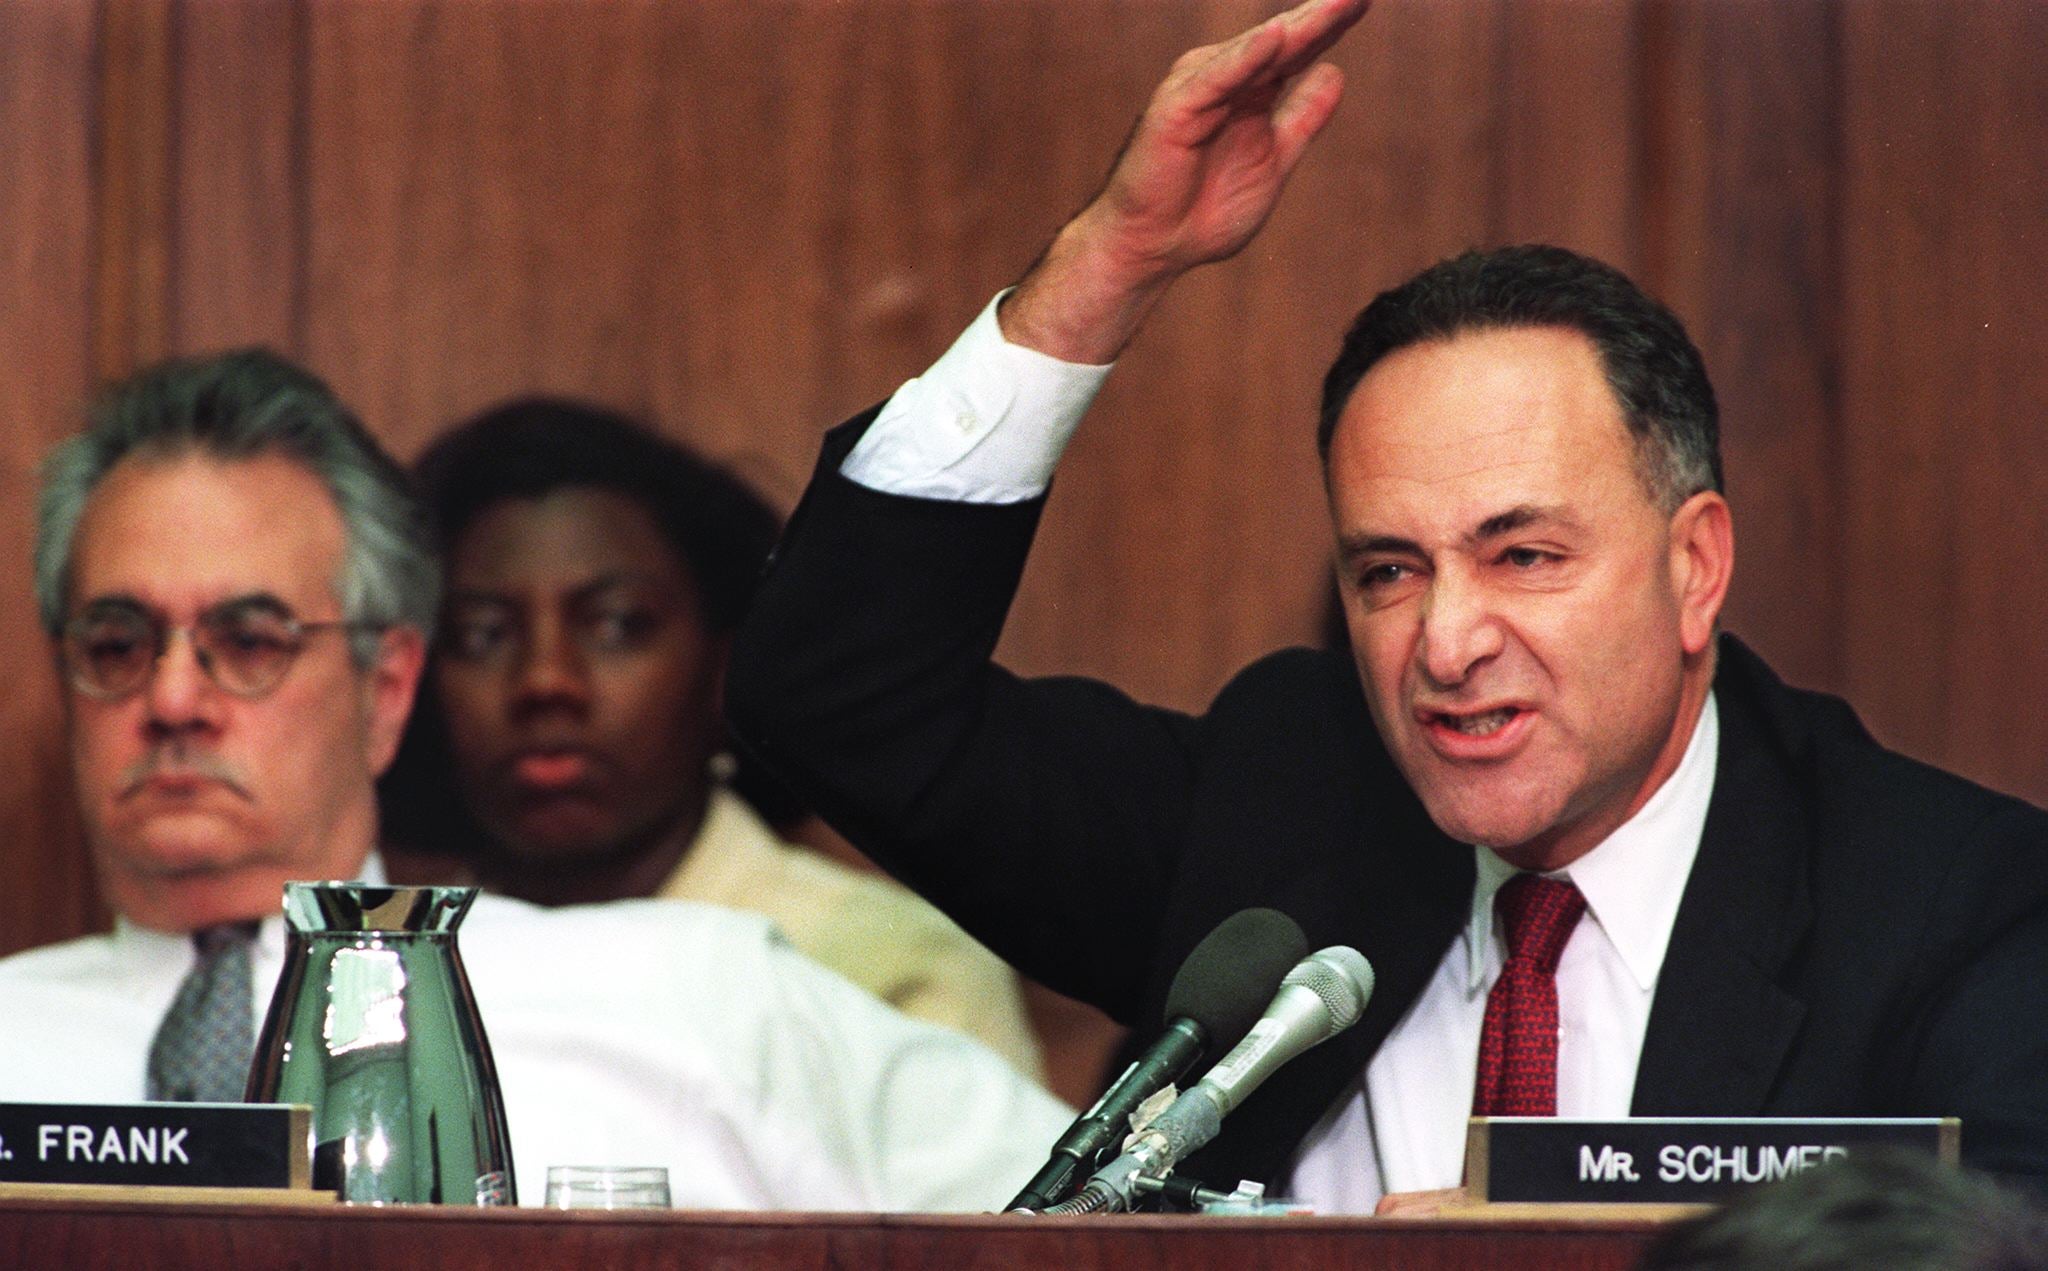 Then-Representive-elect Chuck Schumer, a Democrat from New York, argues for a no-vote on the first article of impeachment against Bill Clinton on 11 December 1998 on Capitol Hill in Washington, DC